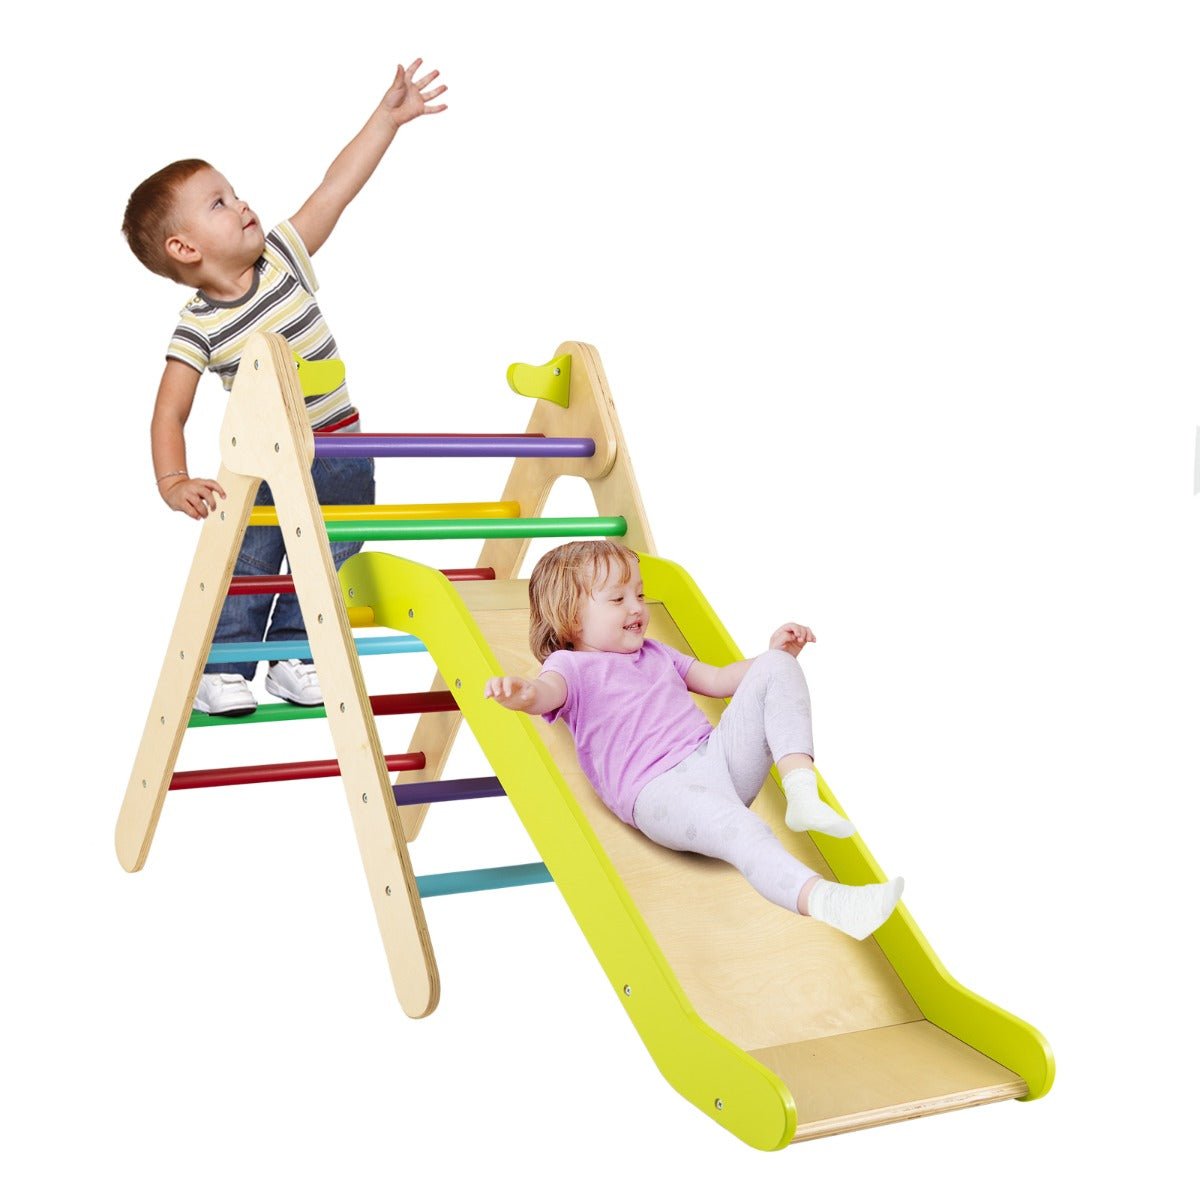 2-in-1 Kids Climbing Triangle and Slide - Play, Climb, and Explore